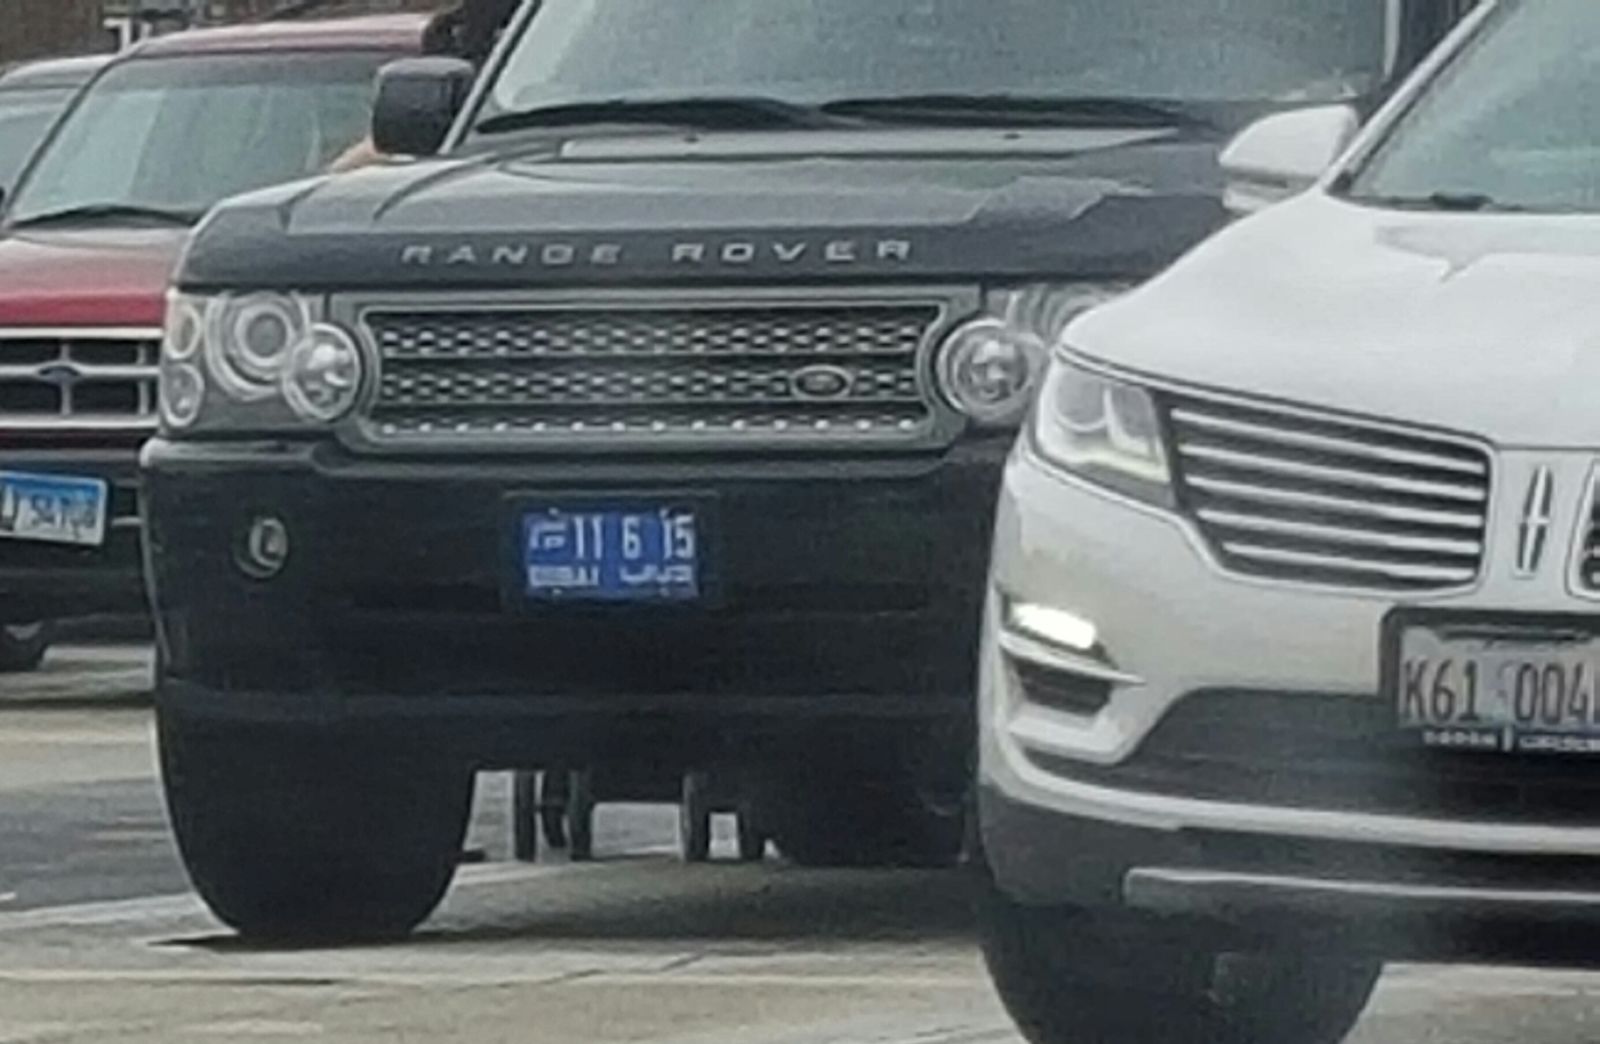 Out of State Plate